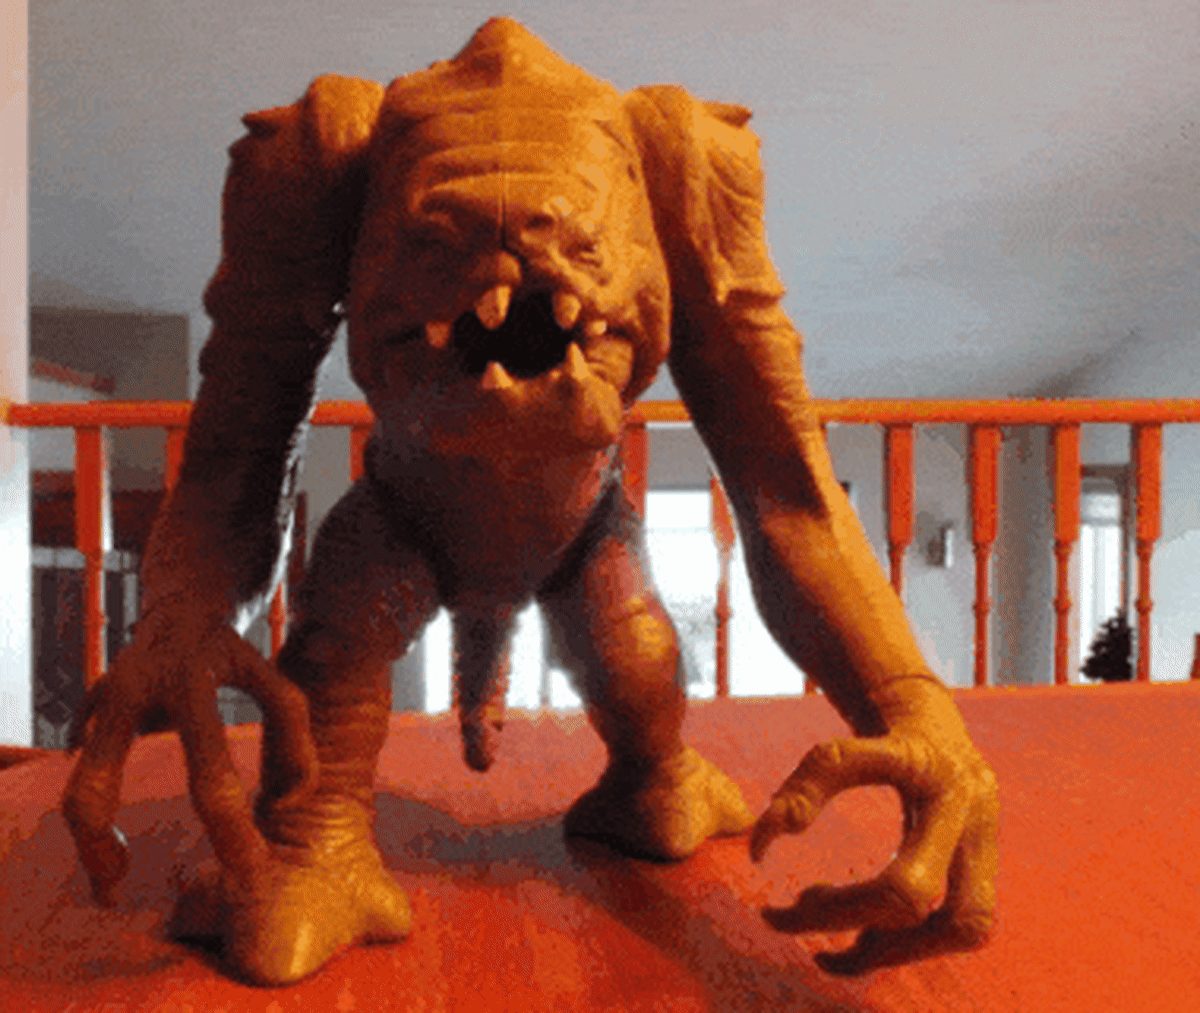 Star wars rancor toy animation. Created using stop motion.